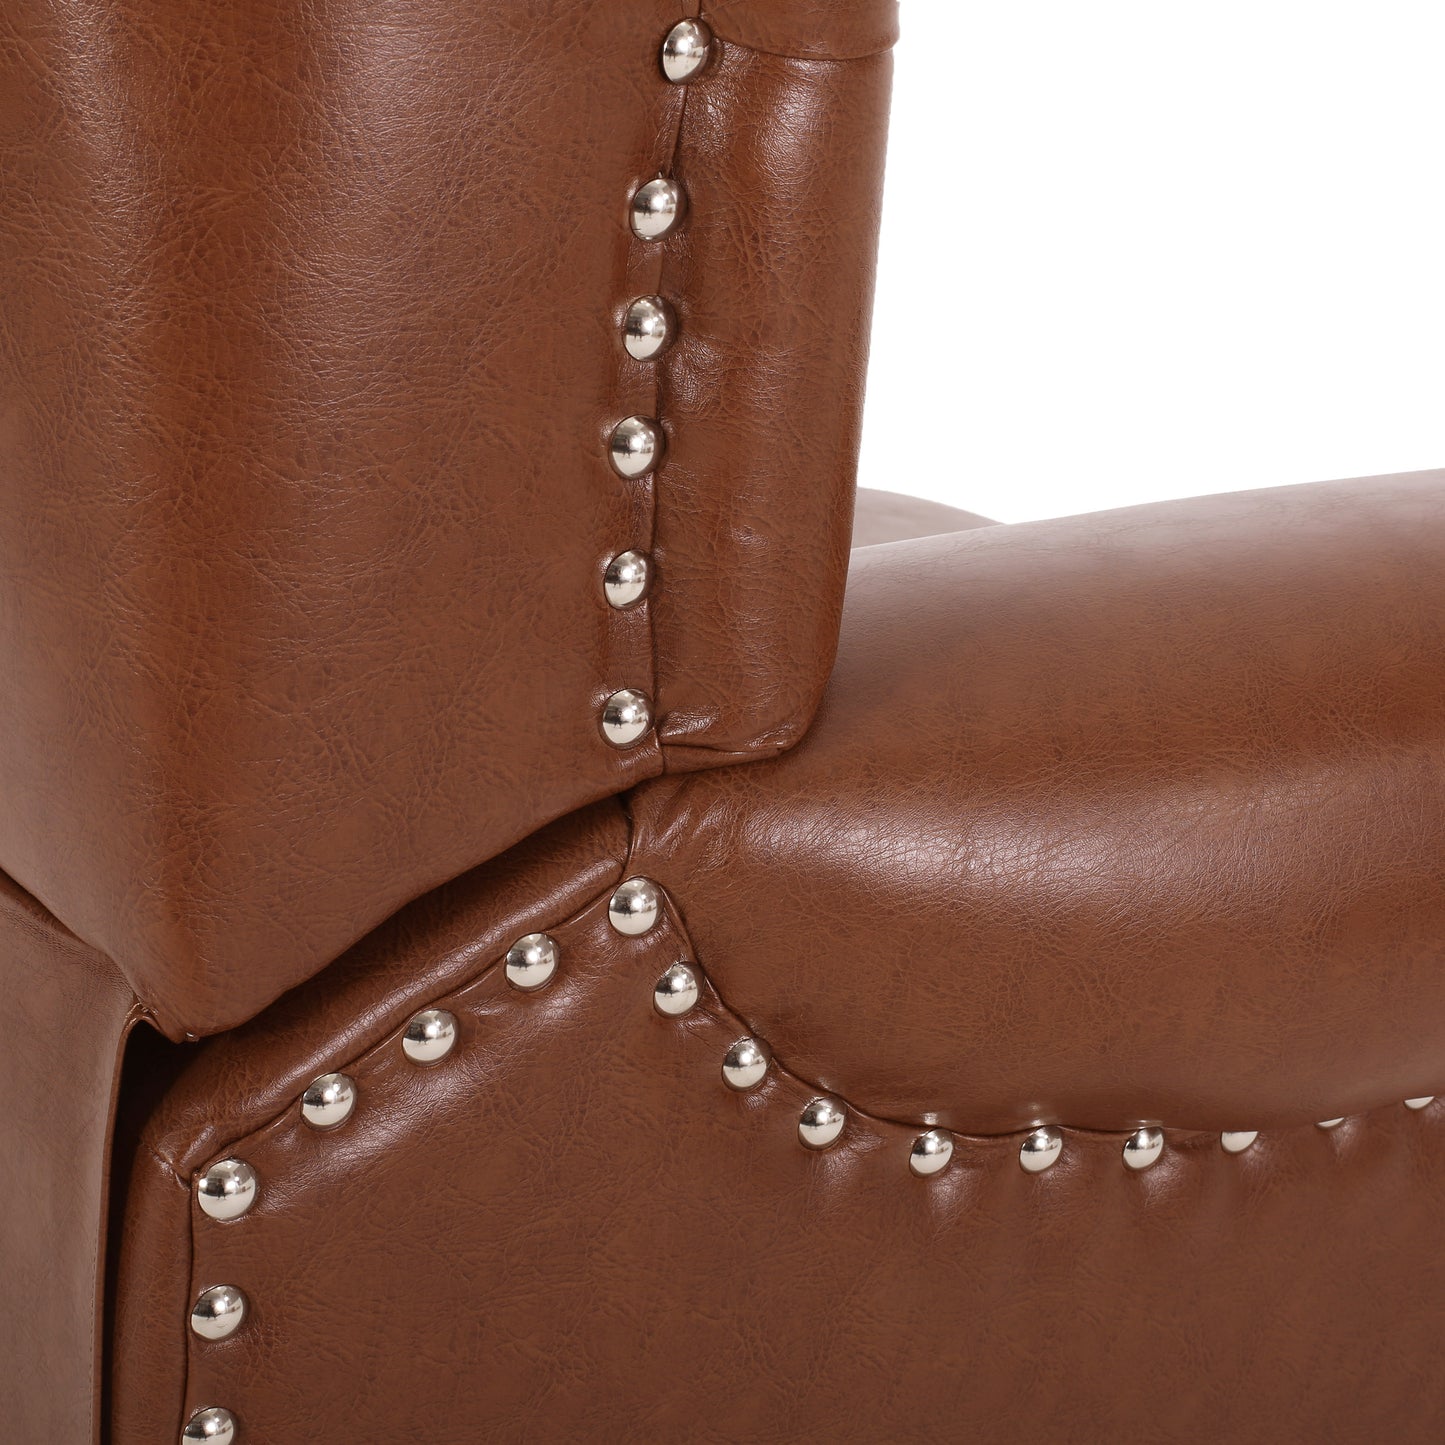 Chatau Contemporary Tufted Recliner with Nailhead Trim